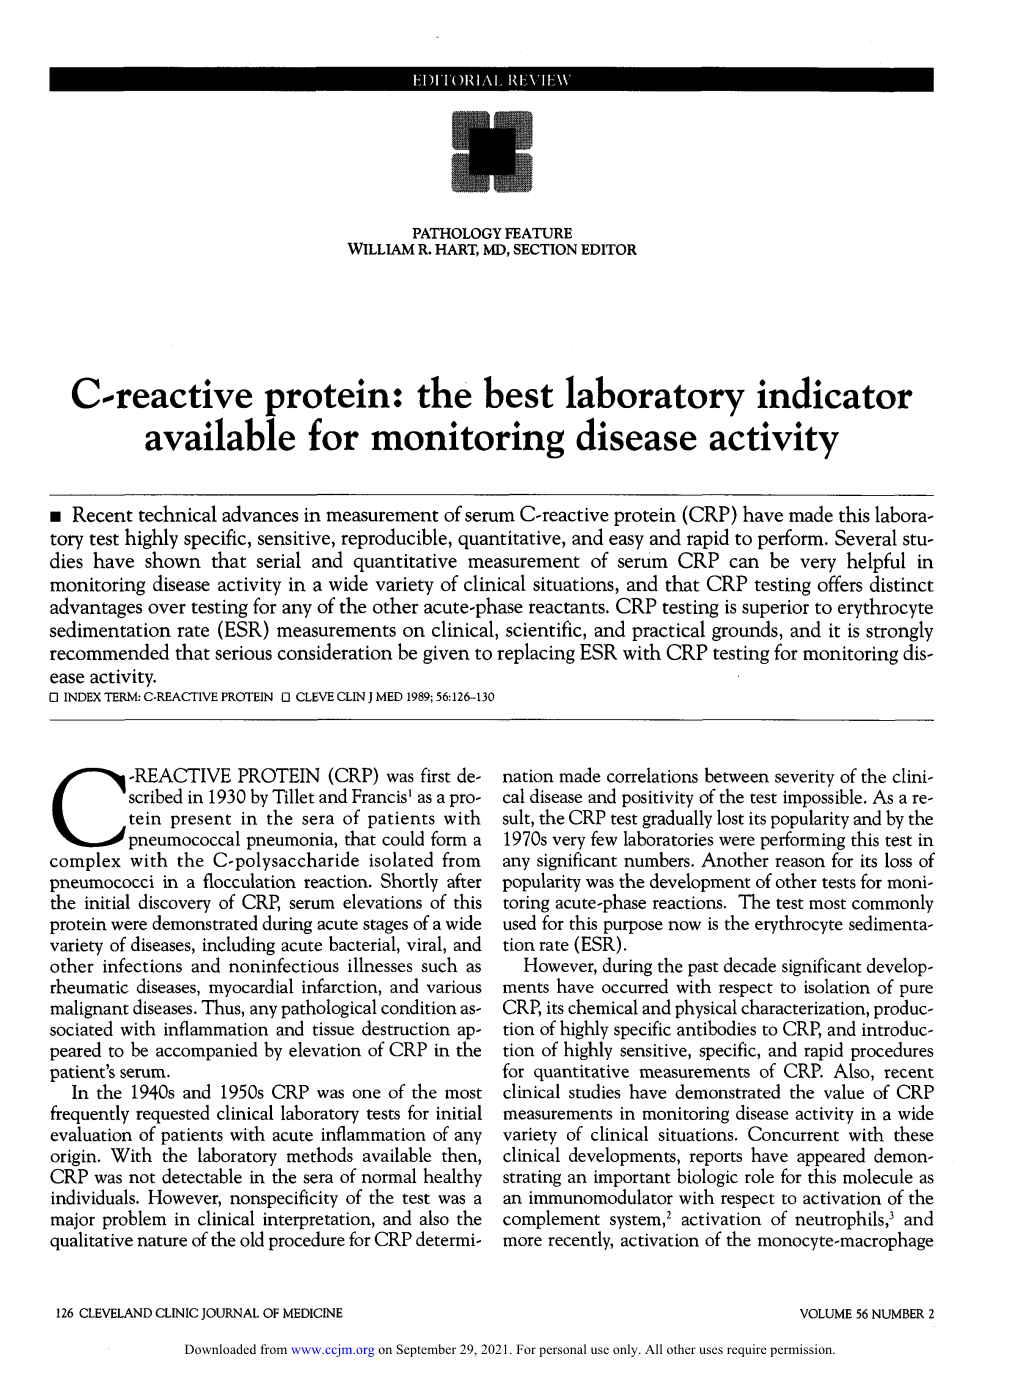 C-Reactive Protein: the Best Laboratory Indicator Available for Monitoring Disease Activity